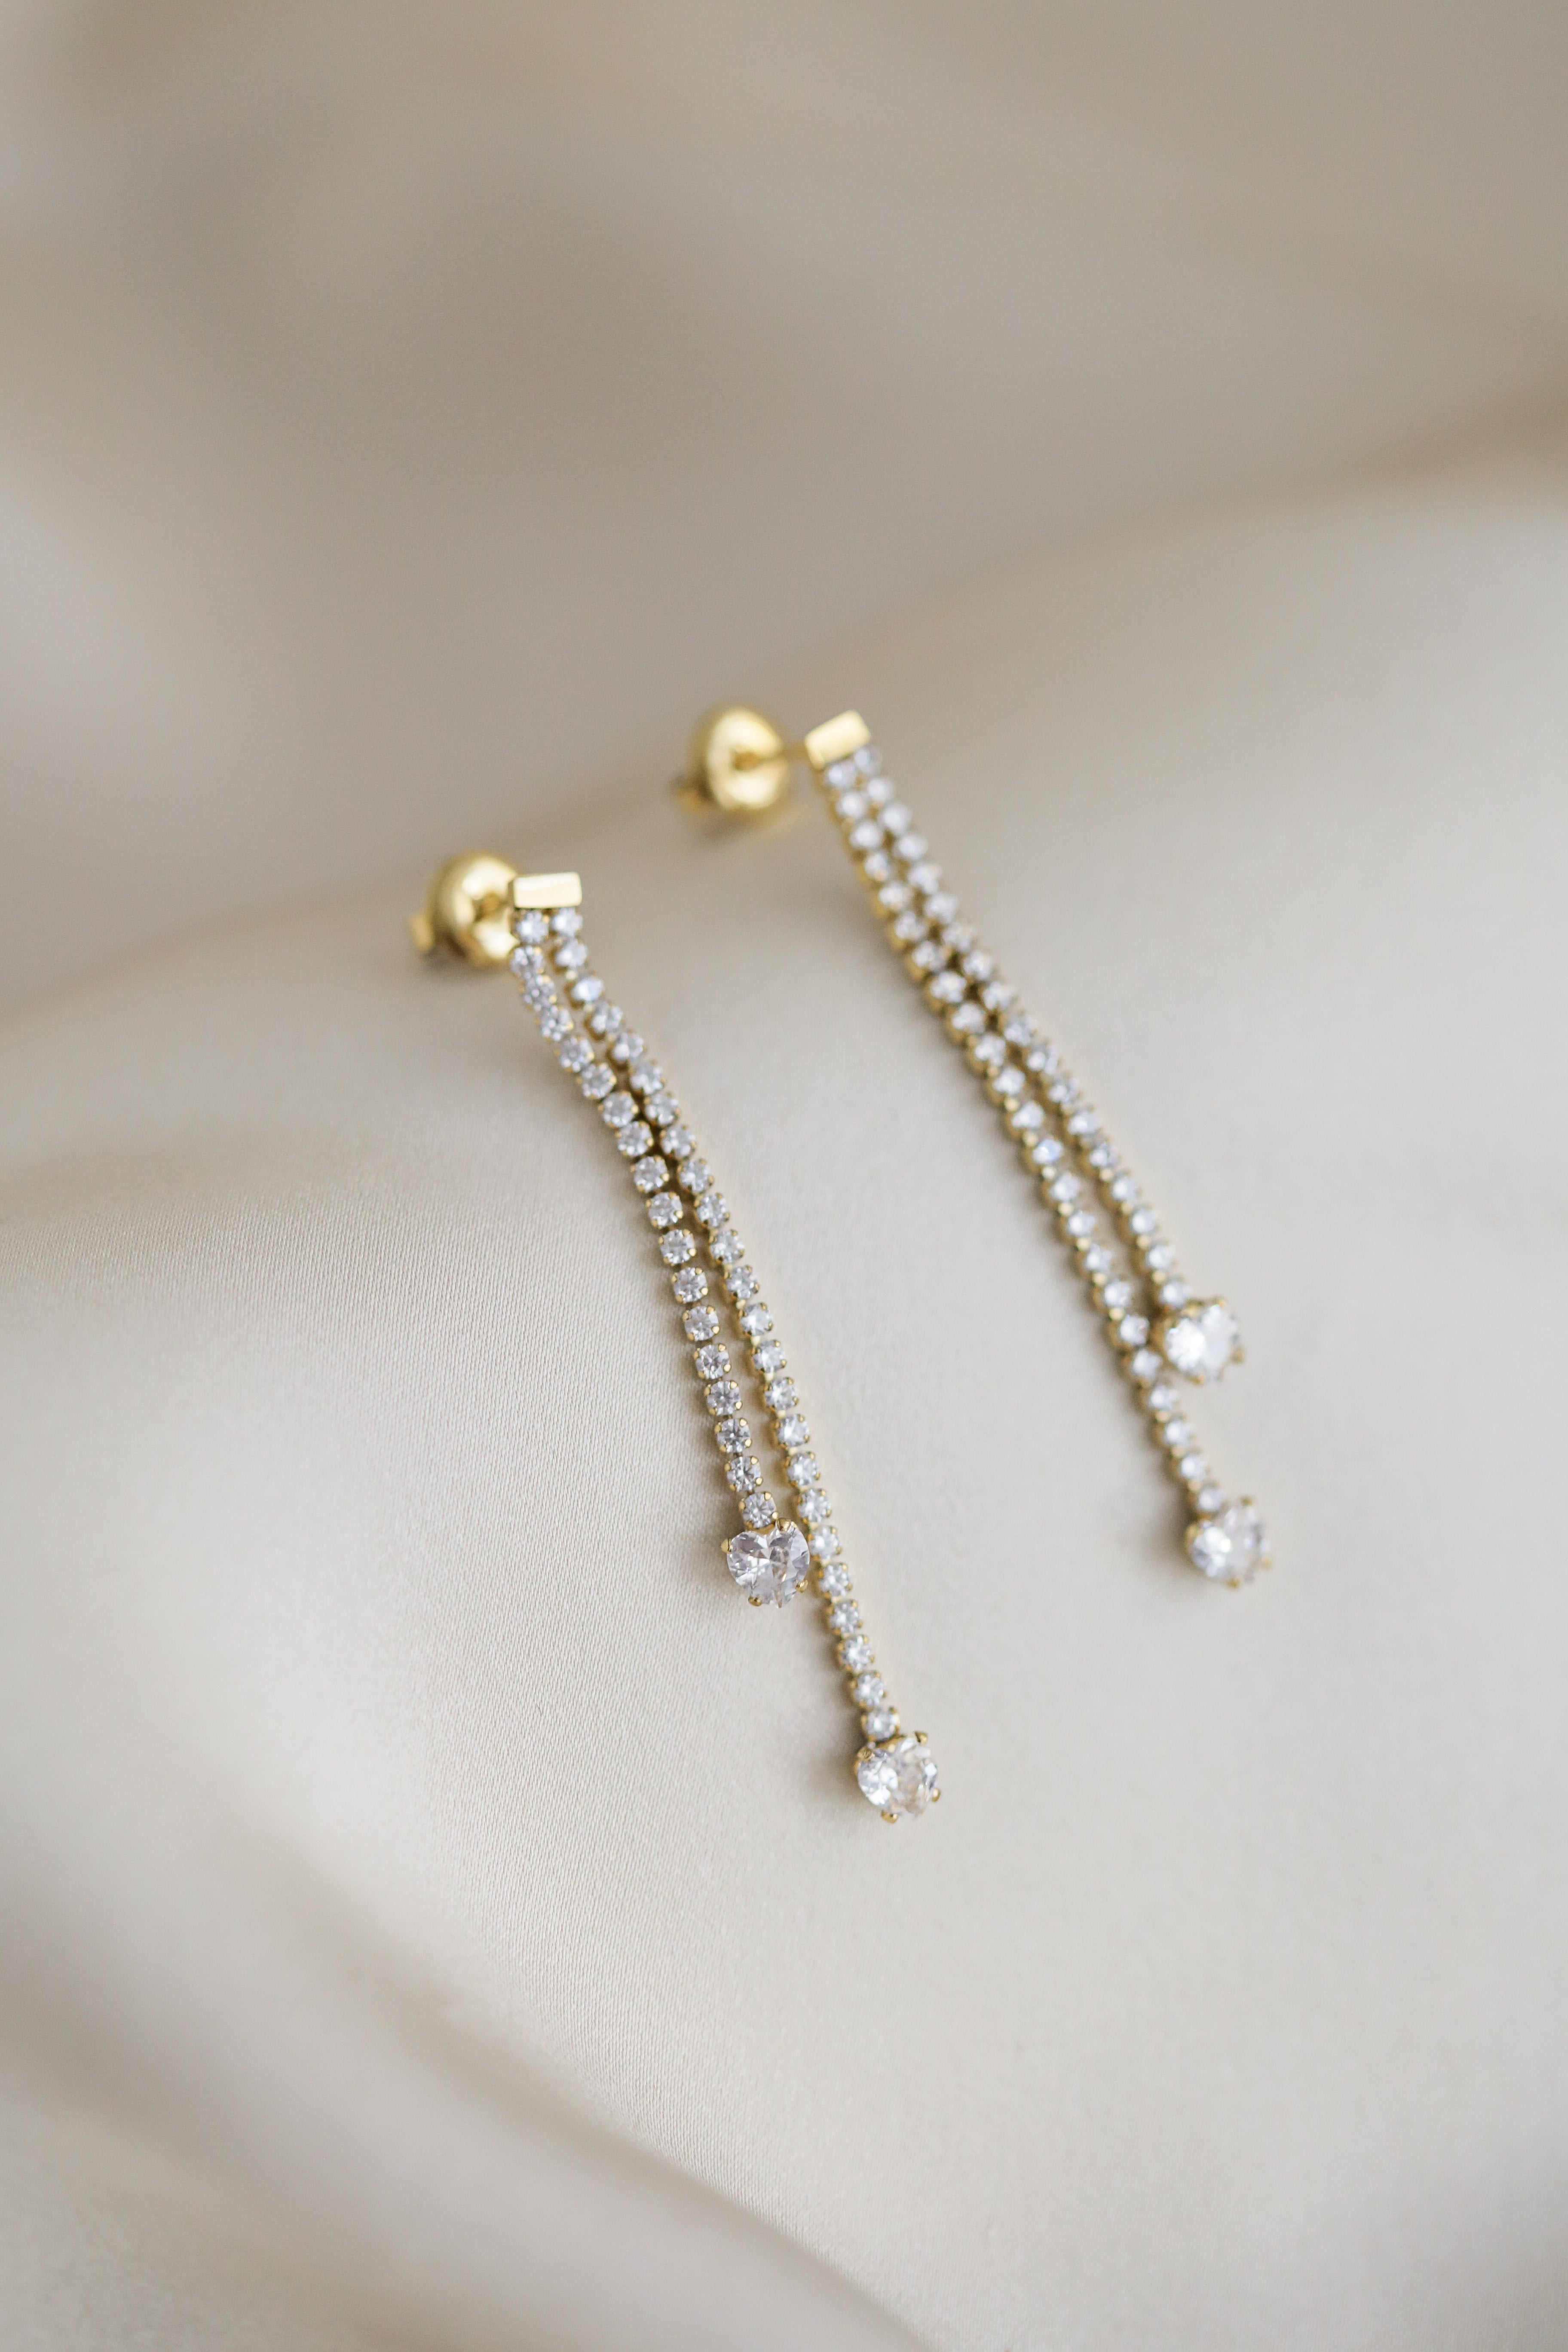 The Heart - Cubic Zirconia Earrings - Boutique Minimaliste has waterproof, durable, elegant and vintage inspired jewelry